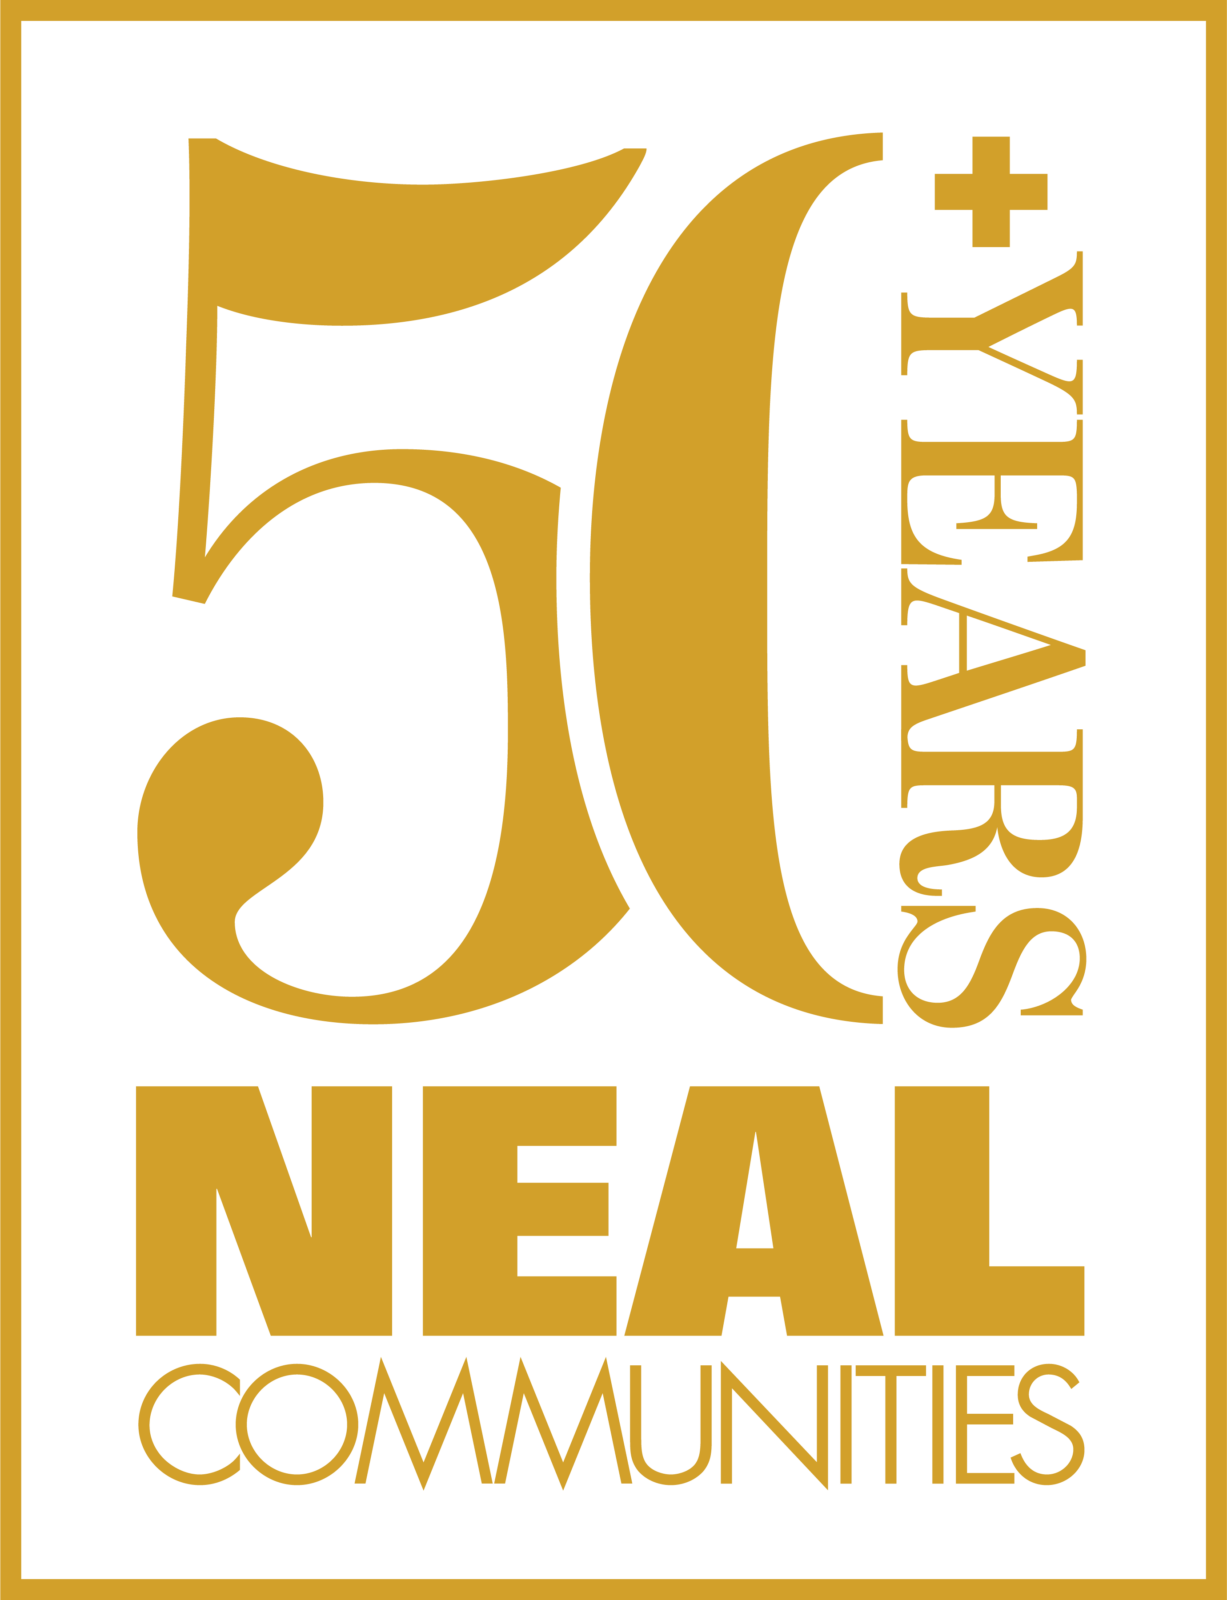 50 Years Neal Communities. Where you live matters.